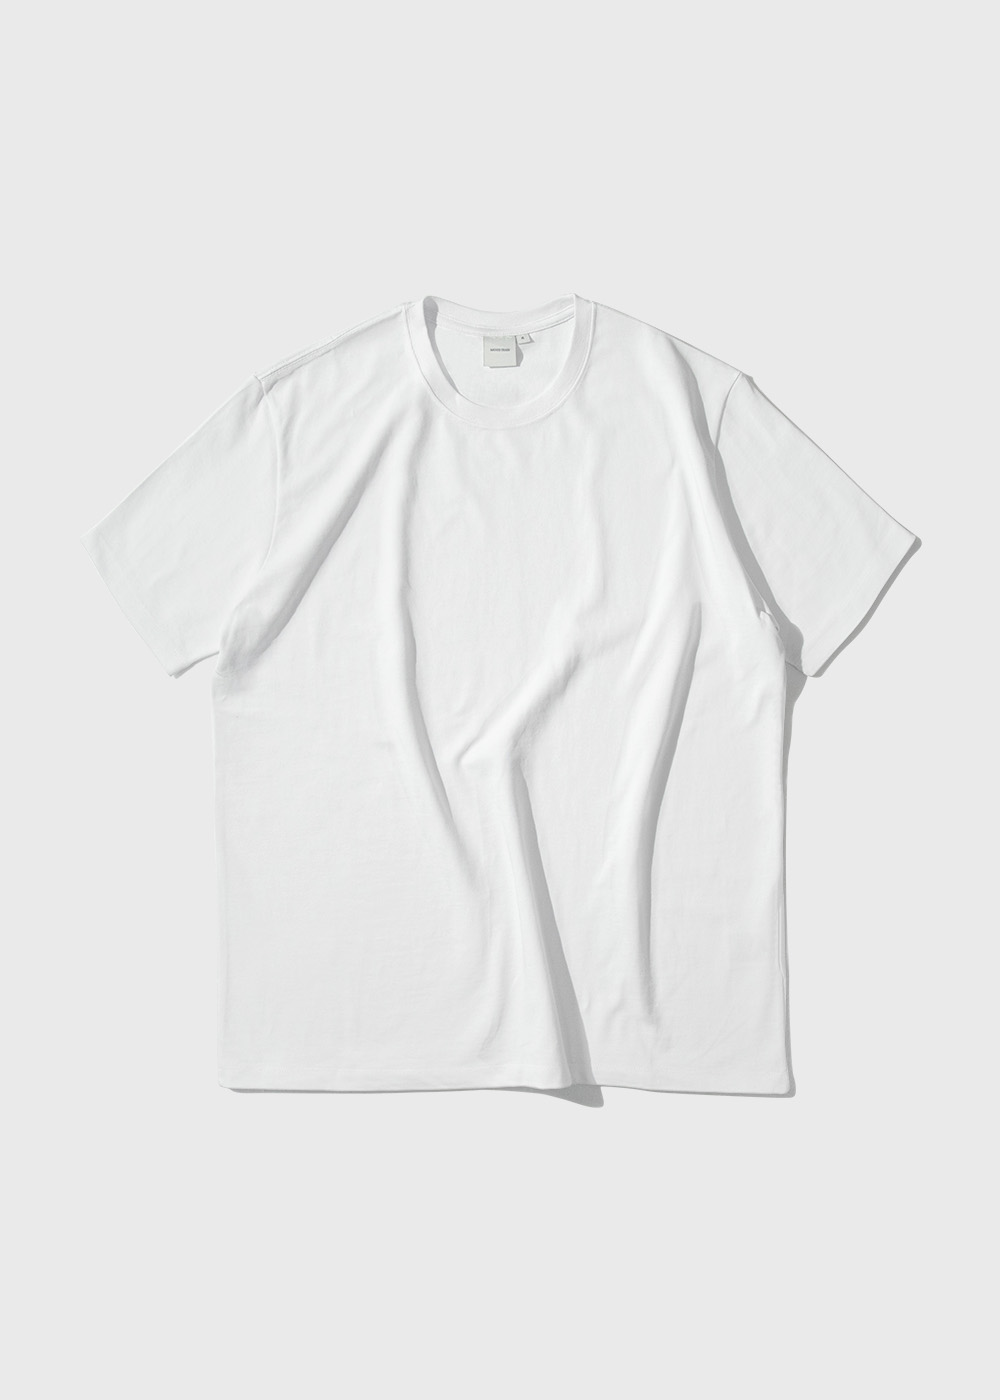 E. Enzymed Combed Cotton 100% 20/2 Single T-shirt _ white